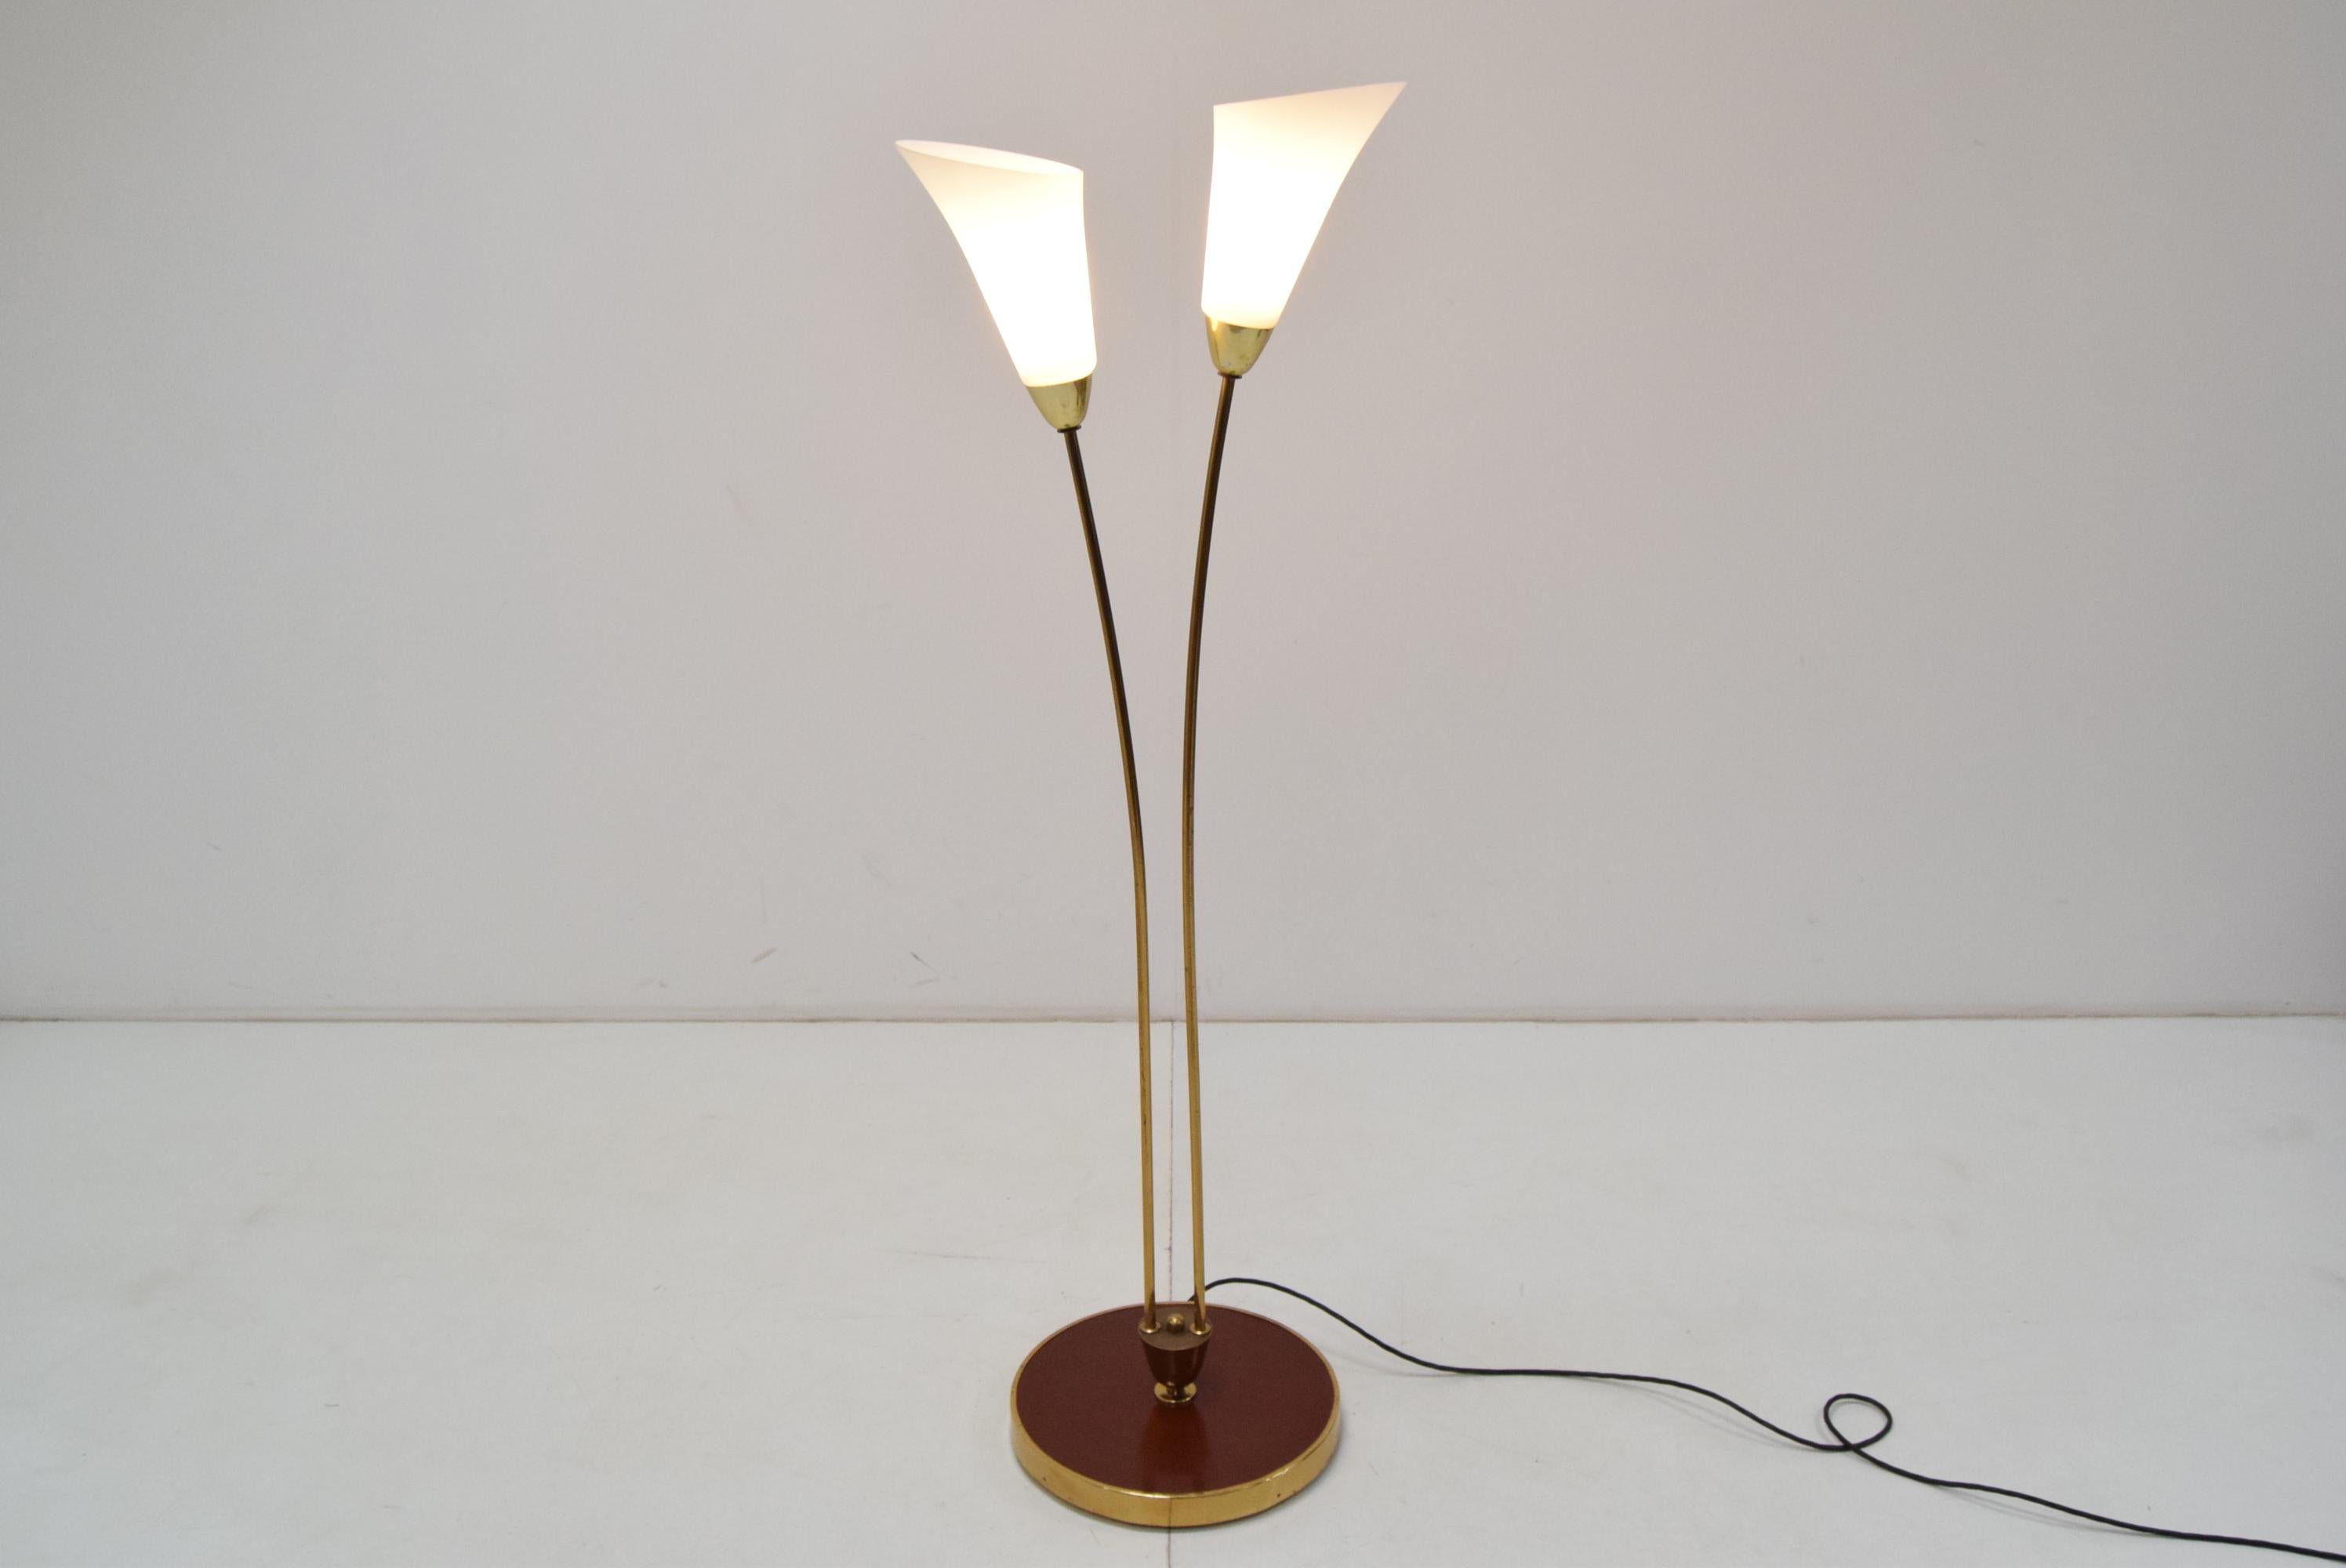 Made in Czechoslovakia
Made of Brass, Steel, Opaline Glass
Measures: Diameter of the base 40cm
2xE27 or E26 bulb
US plug adapter included
Re-polished
Fully Functional
Good Original condition with patina.